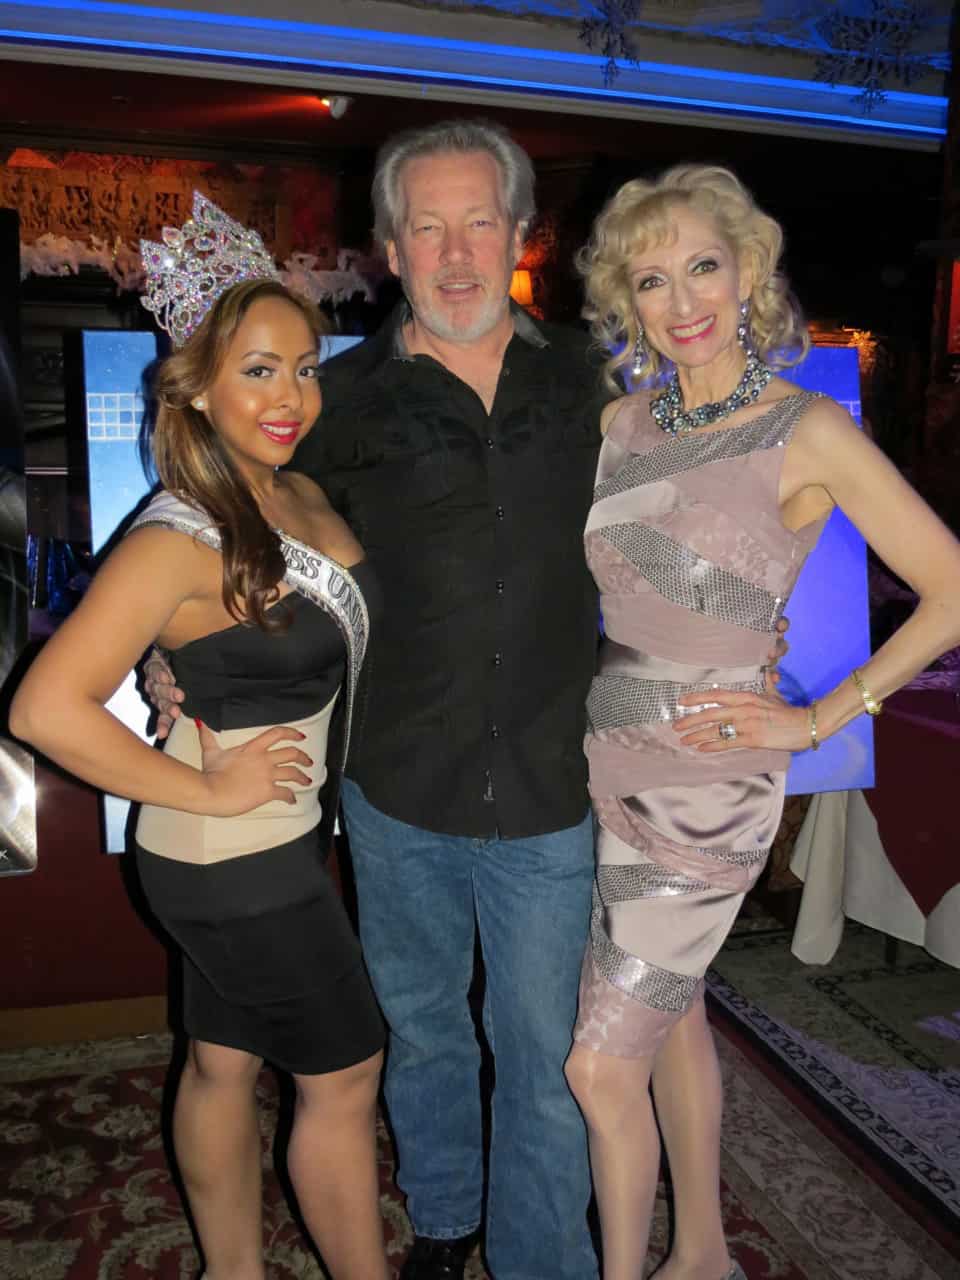 A.D. Cook with beauty queens Tara and Nicole